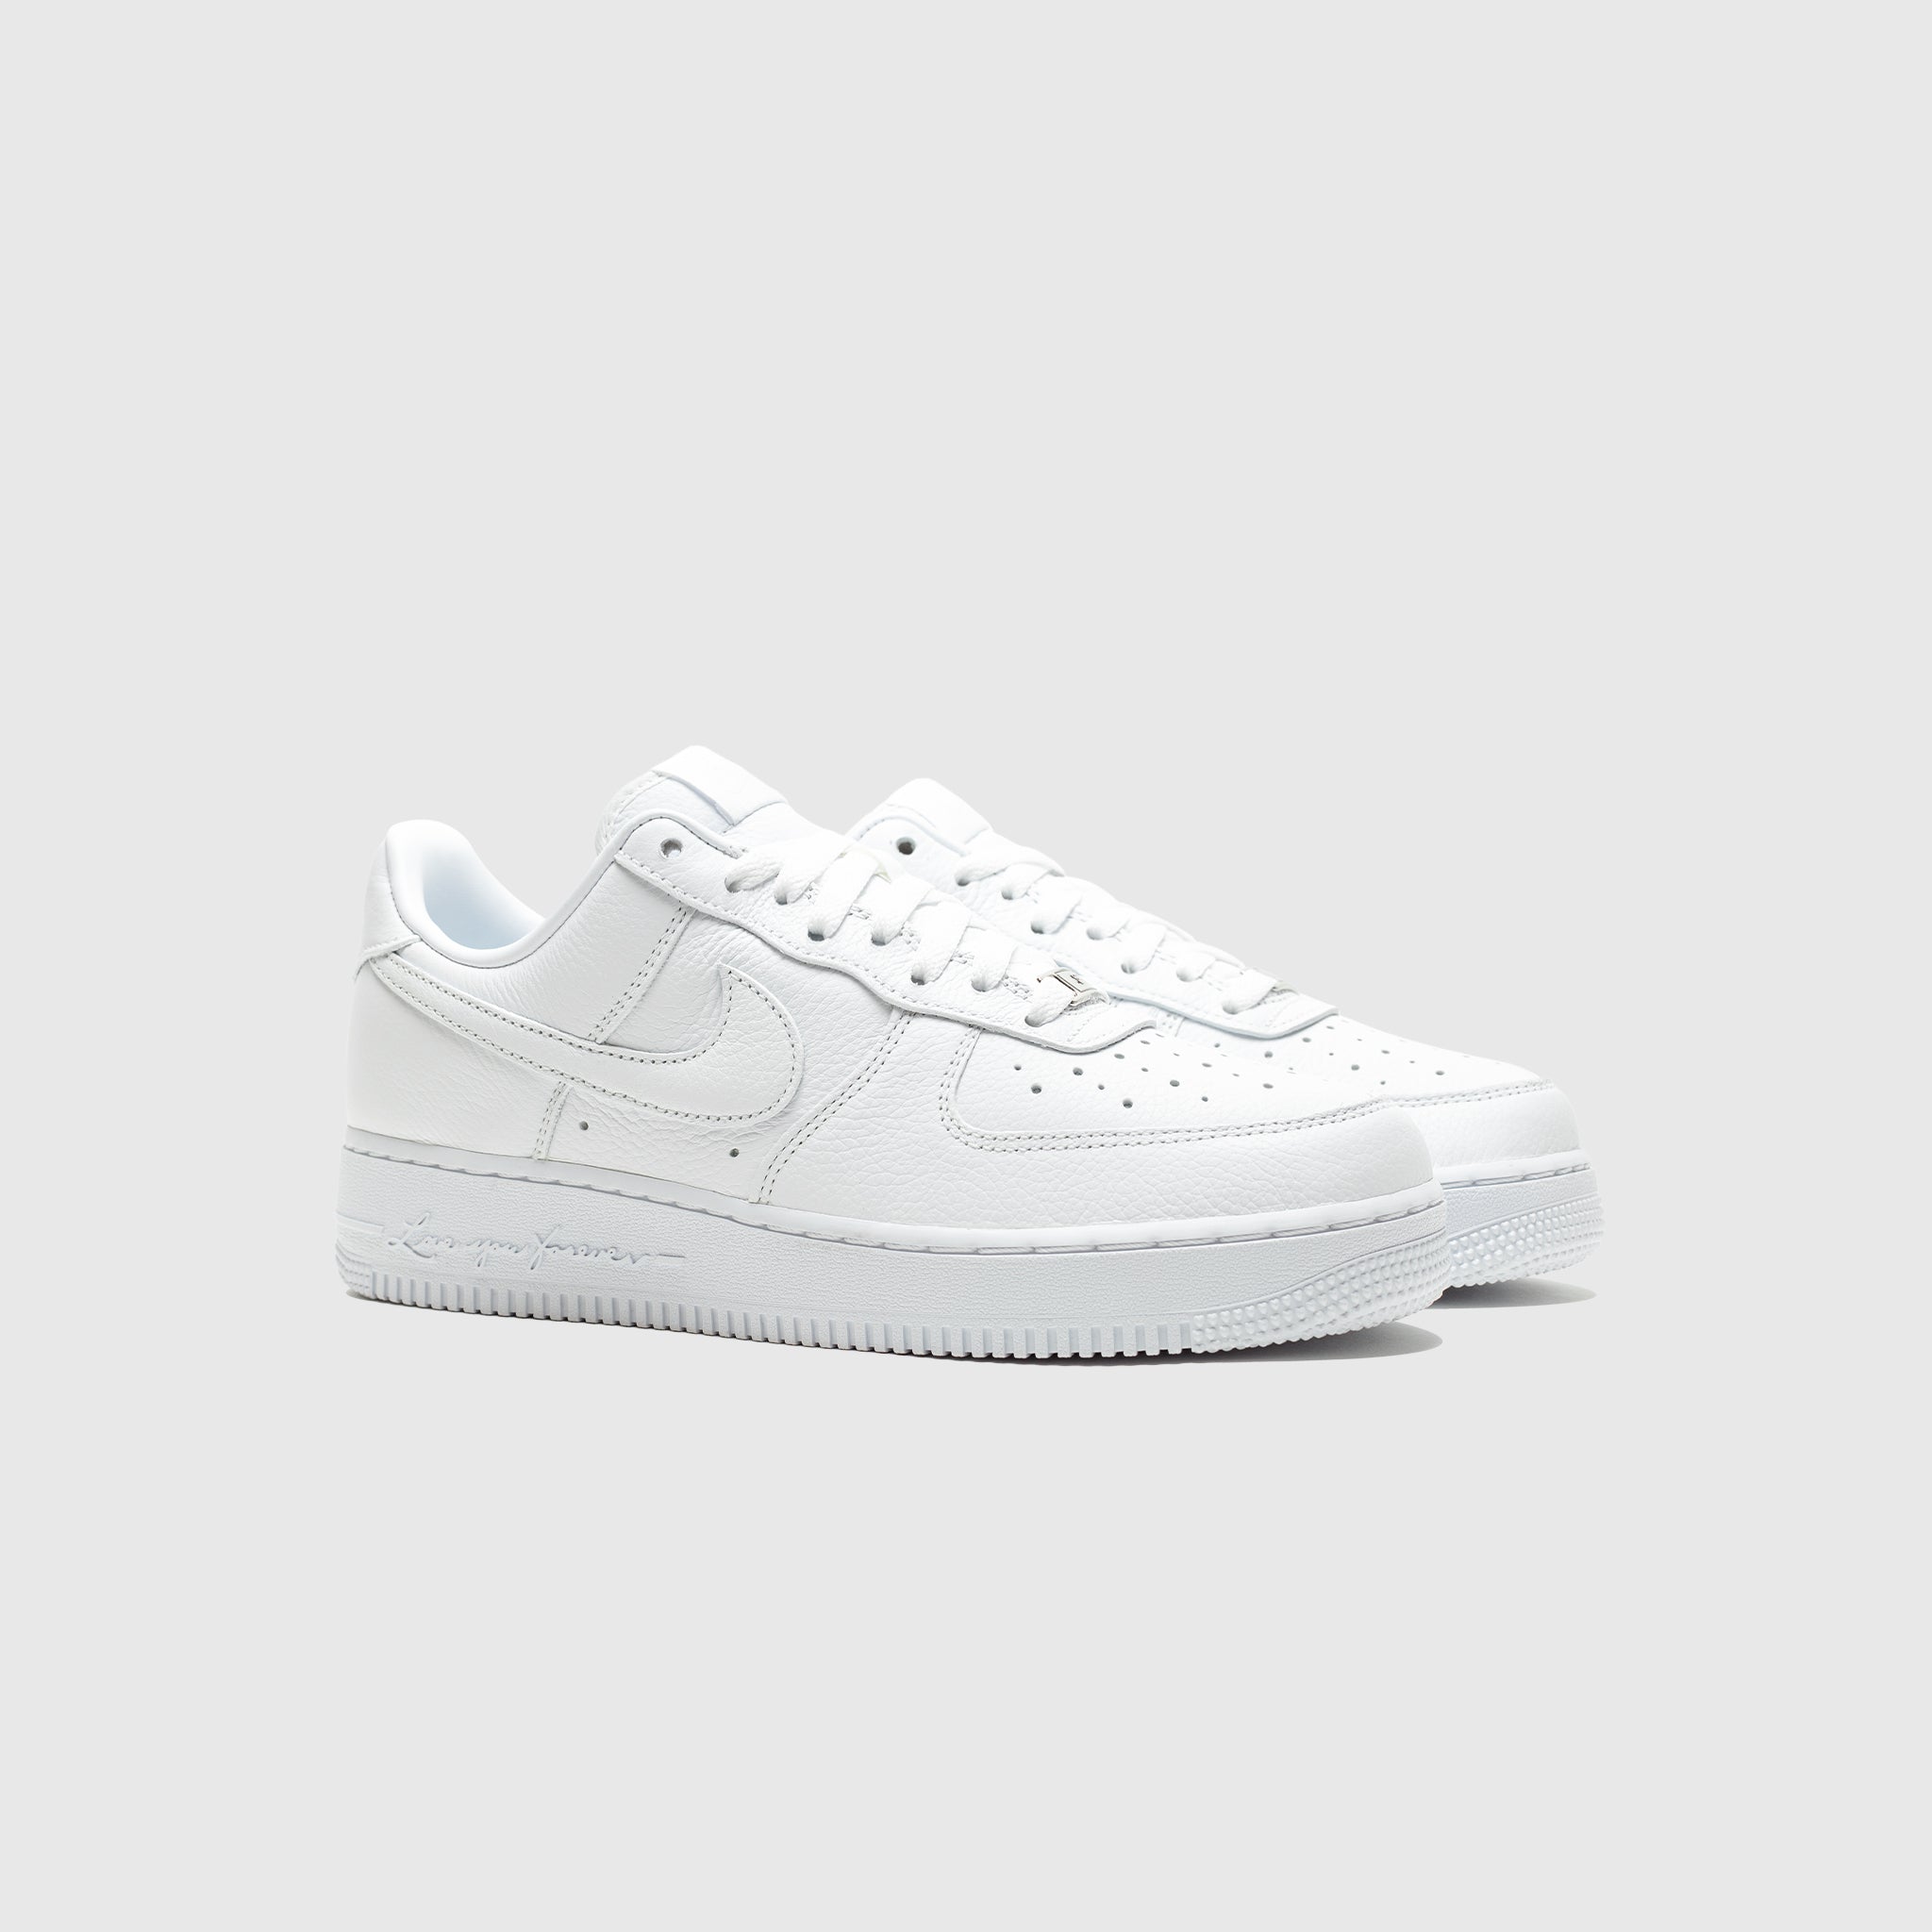 NOCTA X AIR FORCE 1 LOW "CERTIFIED LOVERBOY"